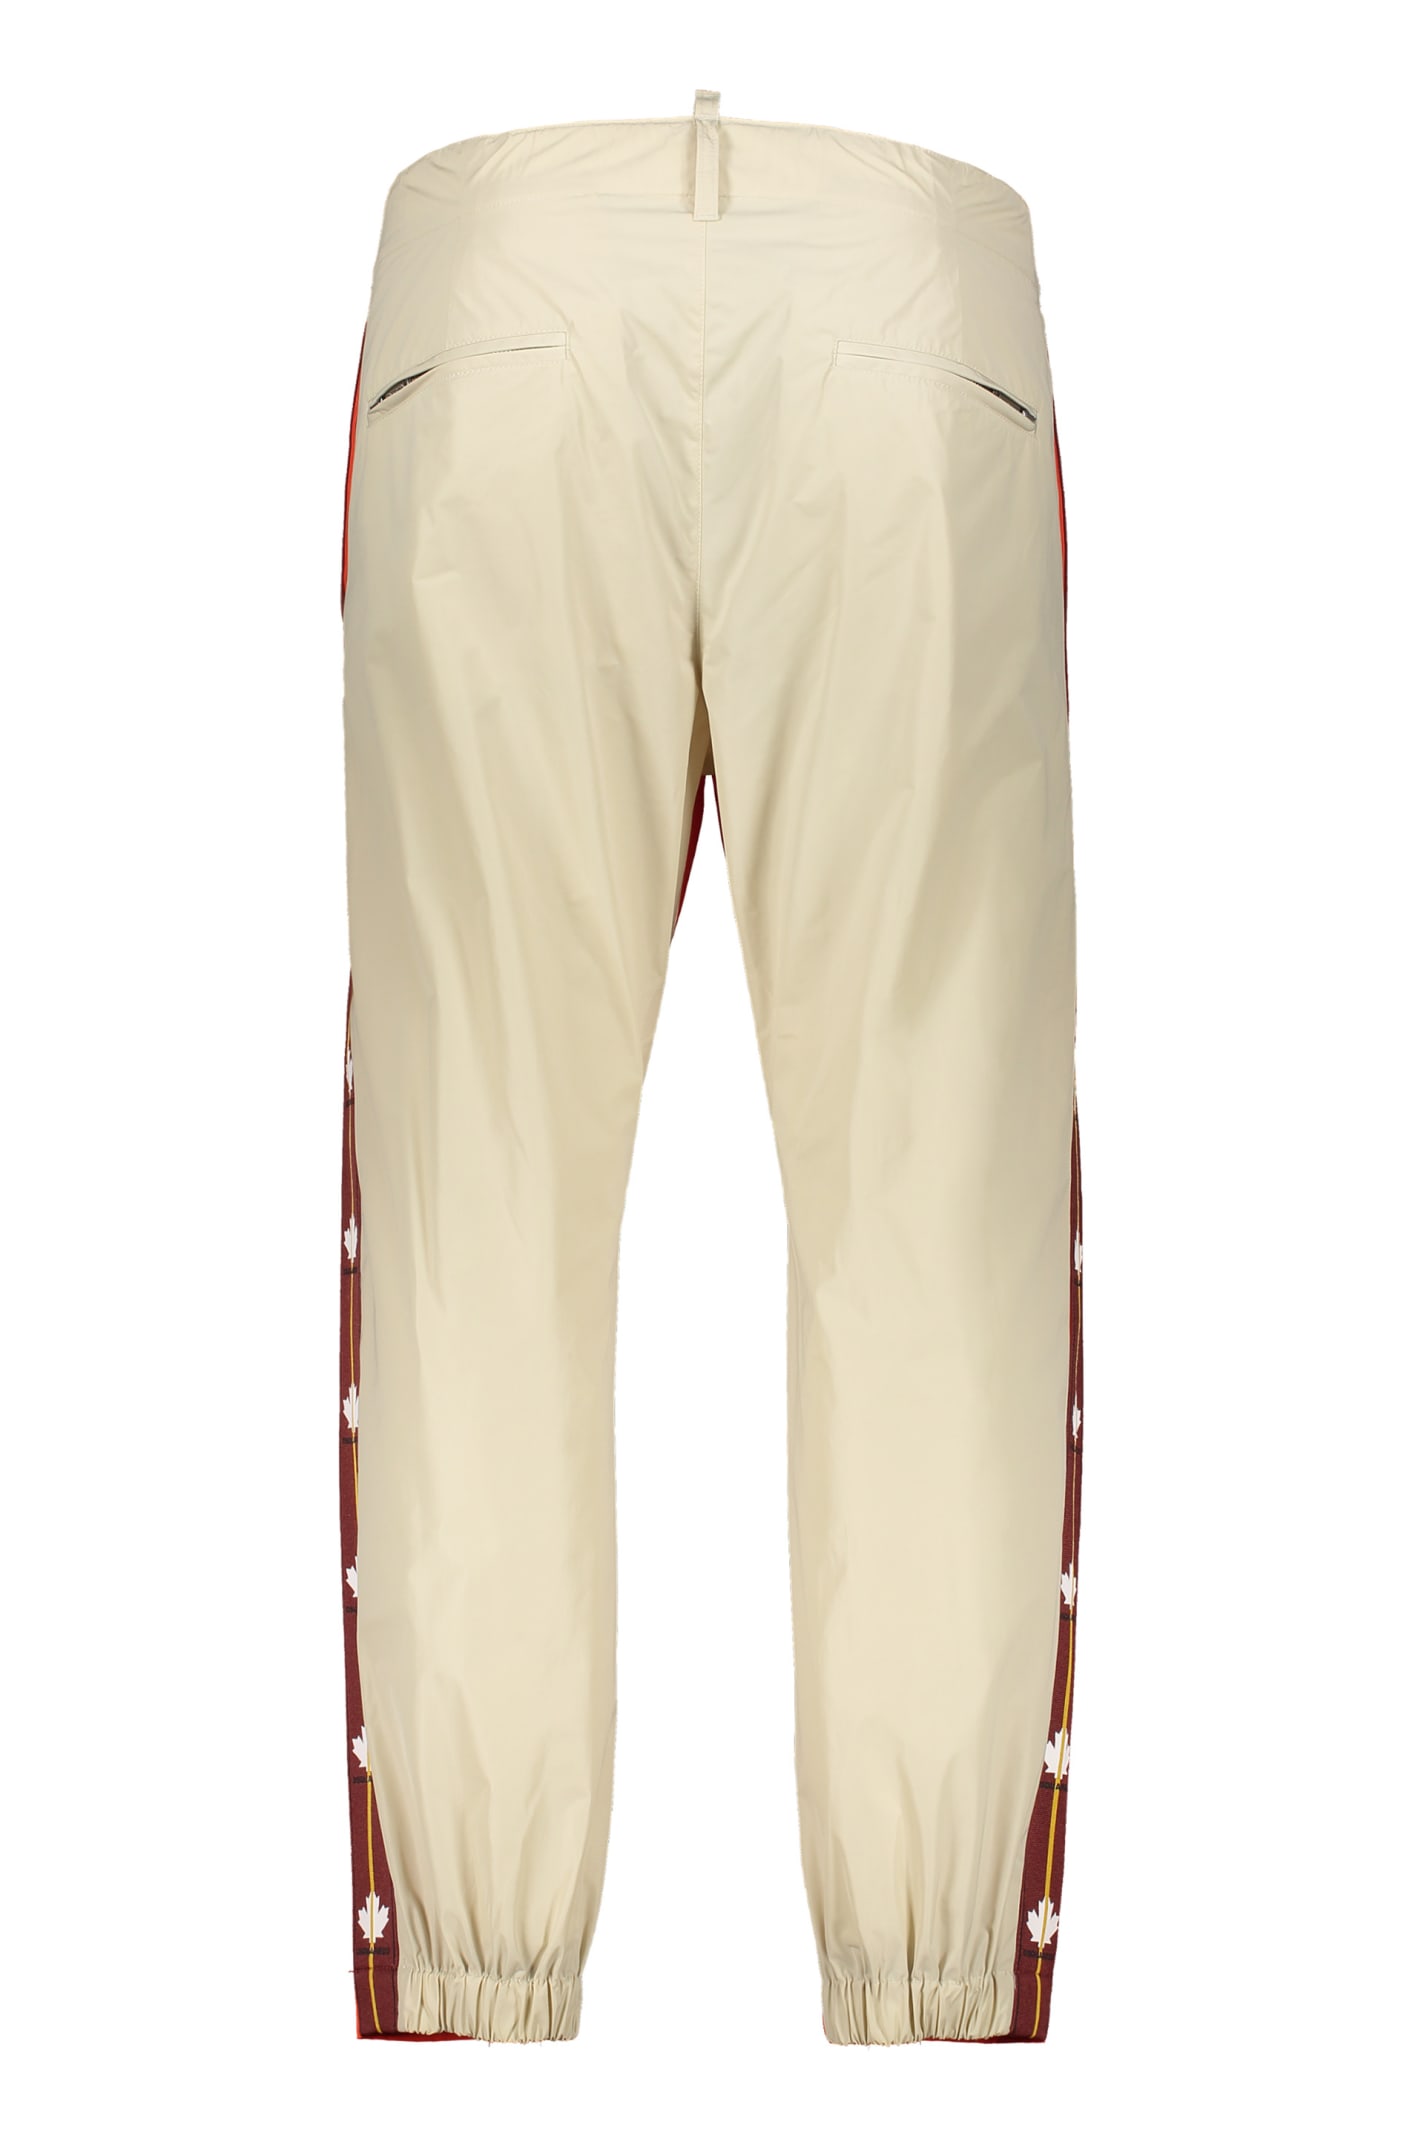 Shop Dsquared2 Track-pants With Contrasting Side Stripes In Orange